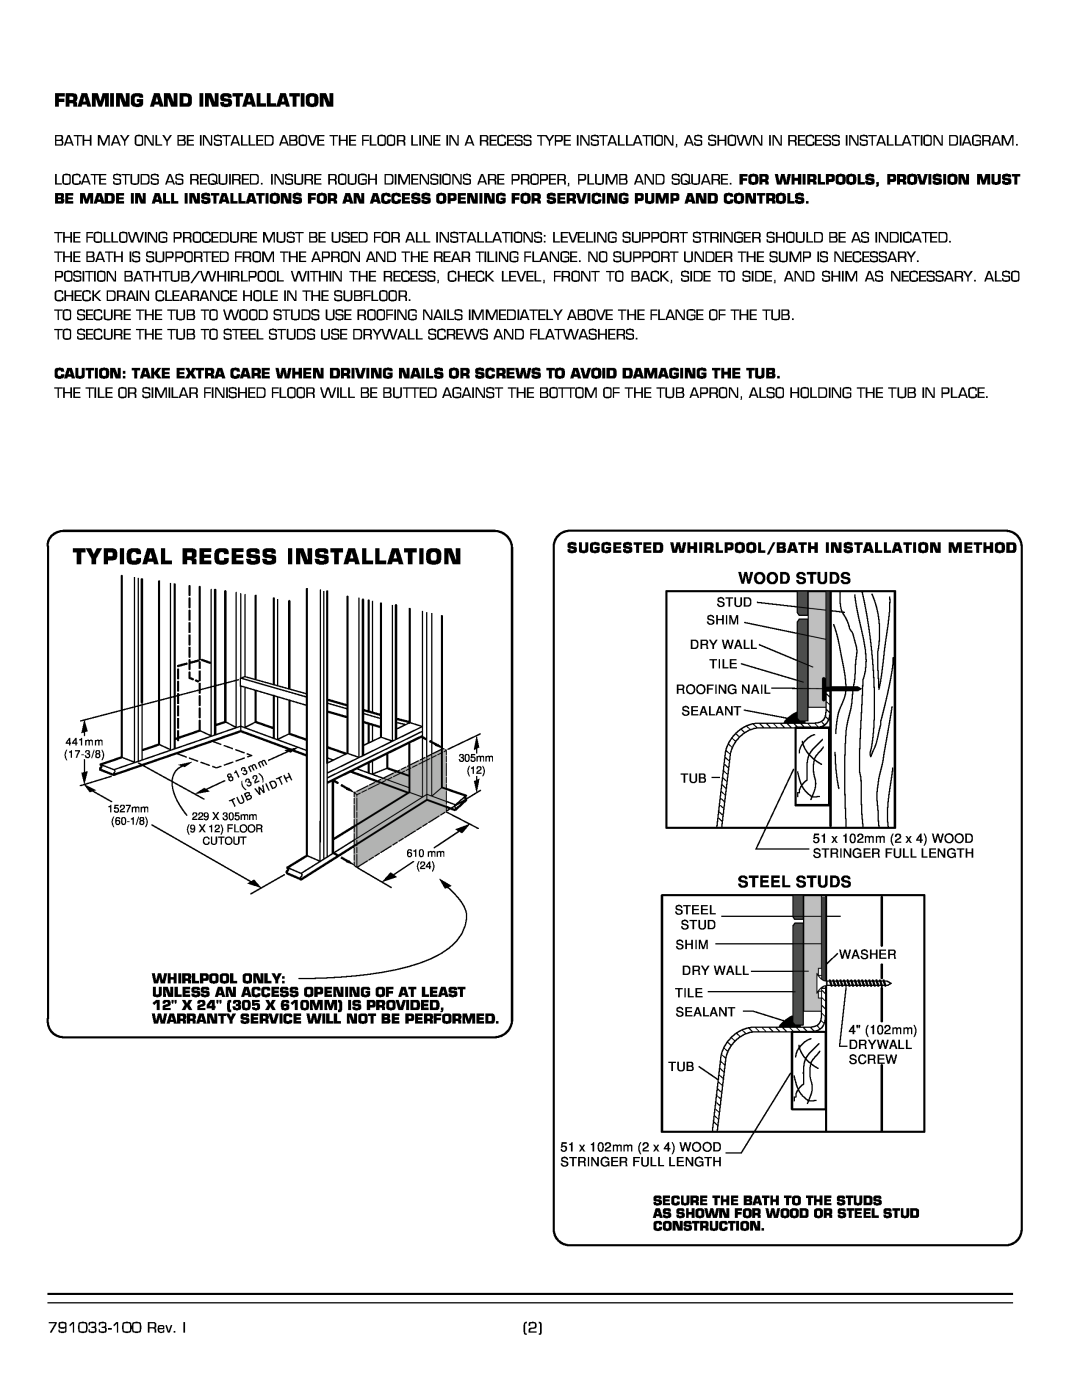 American Standard 2460.XXXW Series Typical Recess Installation, Framing And Installation, Wood Studs, Steel Studs 